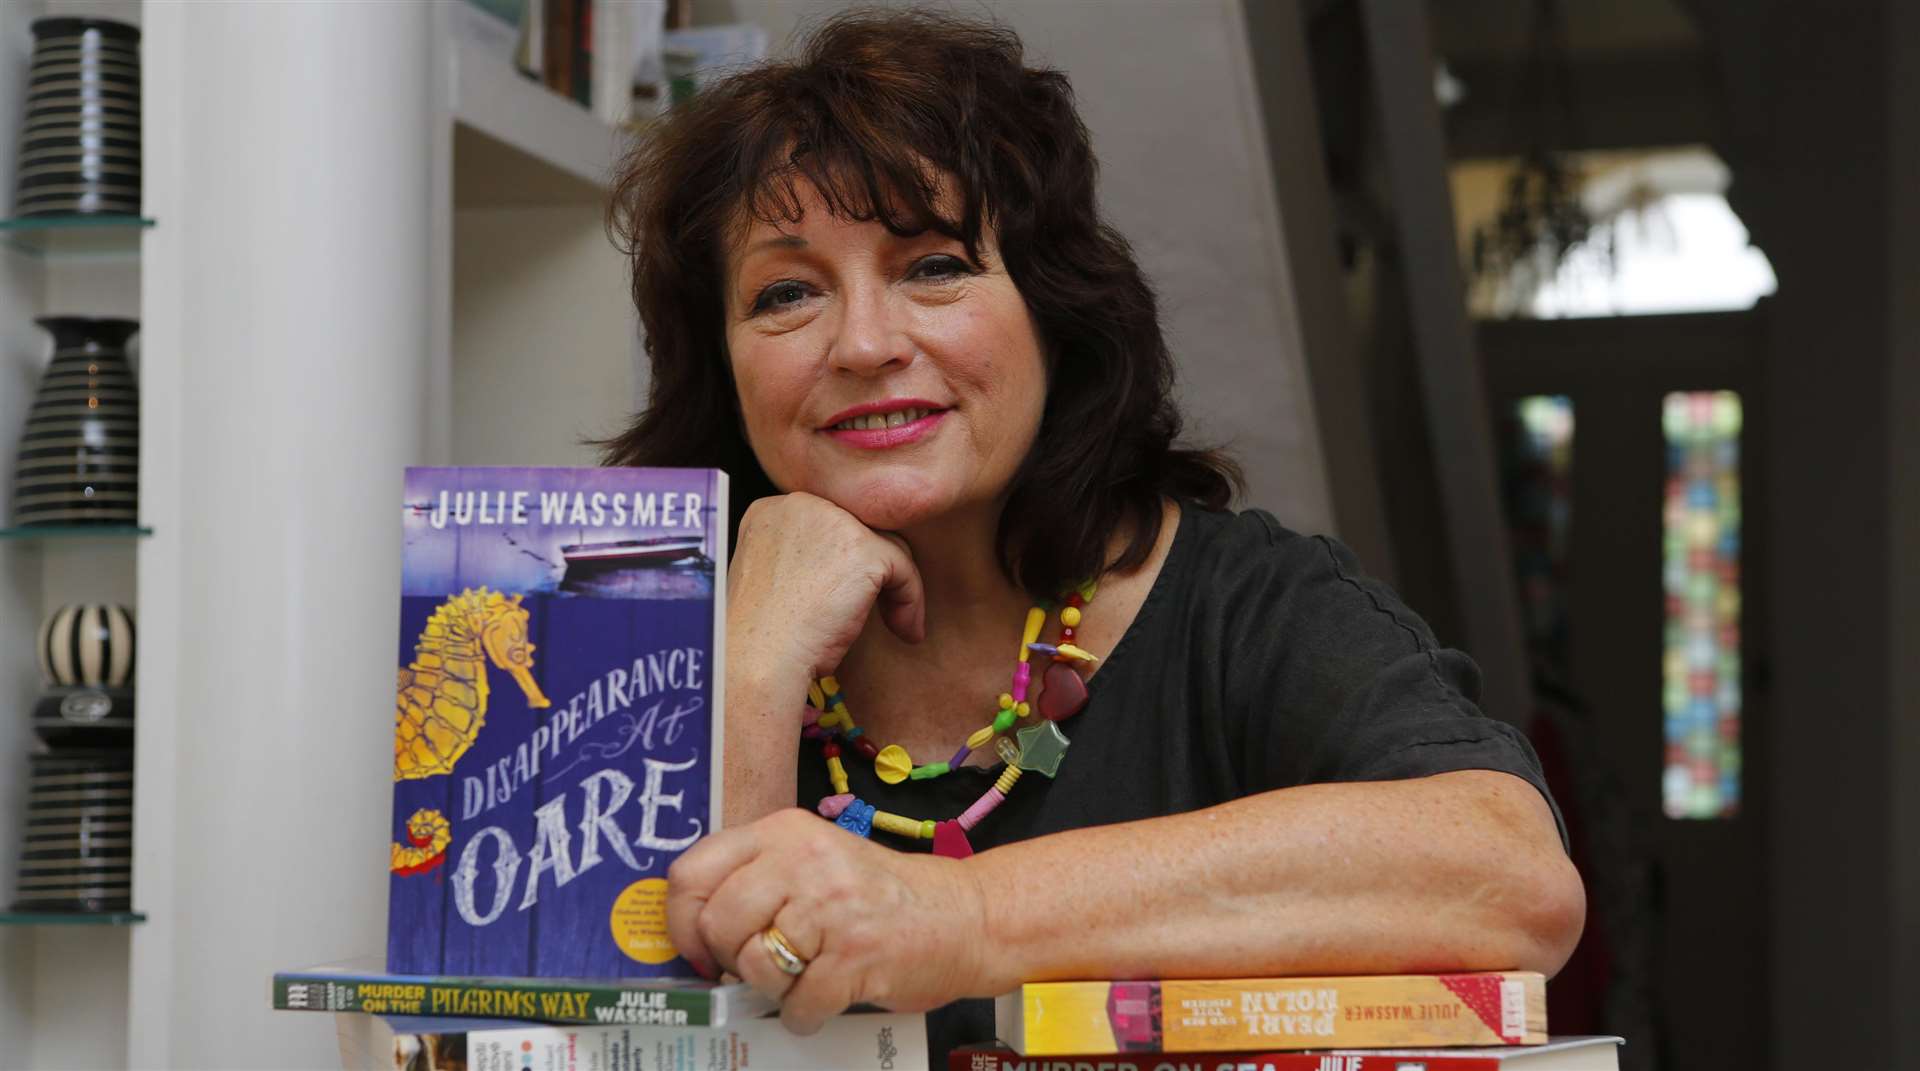 Whitstable author Julie Wassmer's fictional restaurant will come to life Picture: Andy Jones